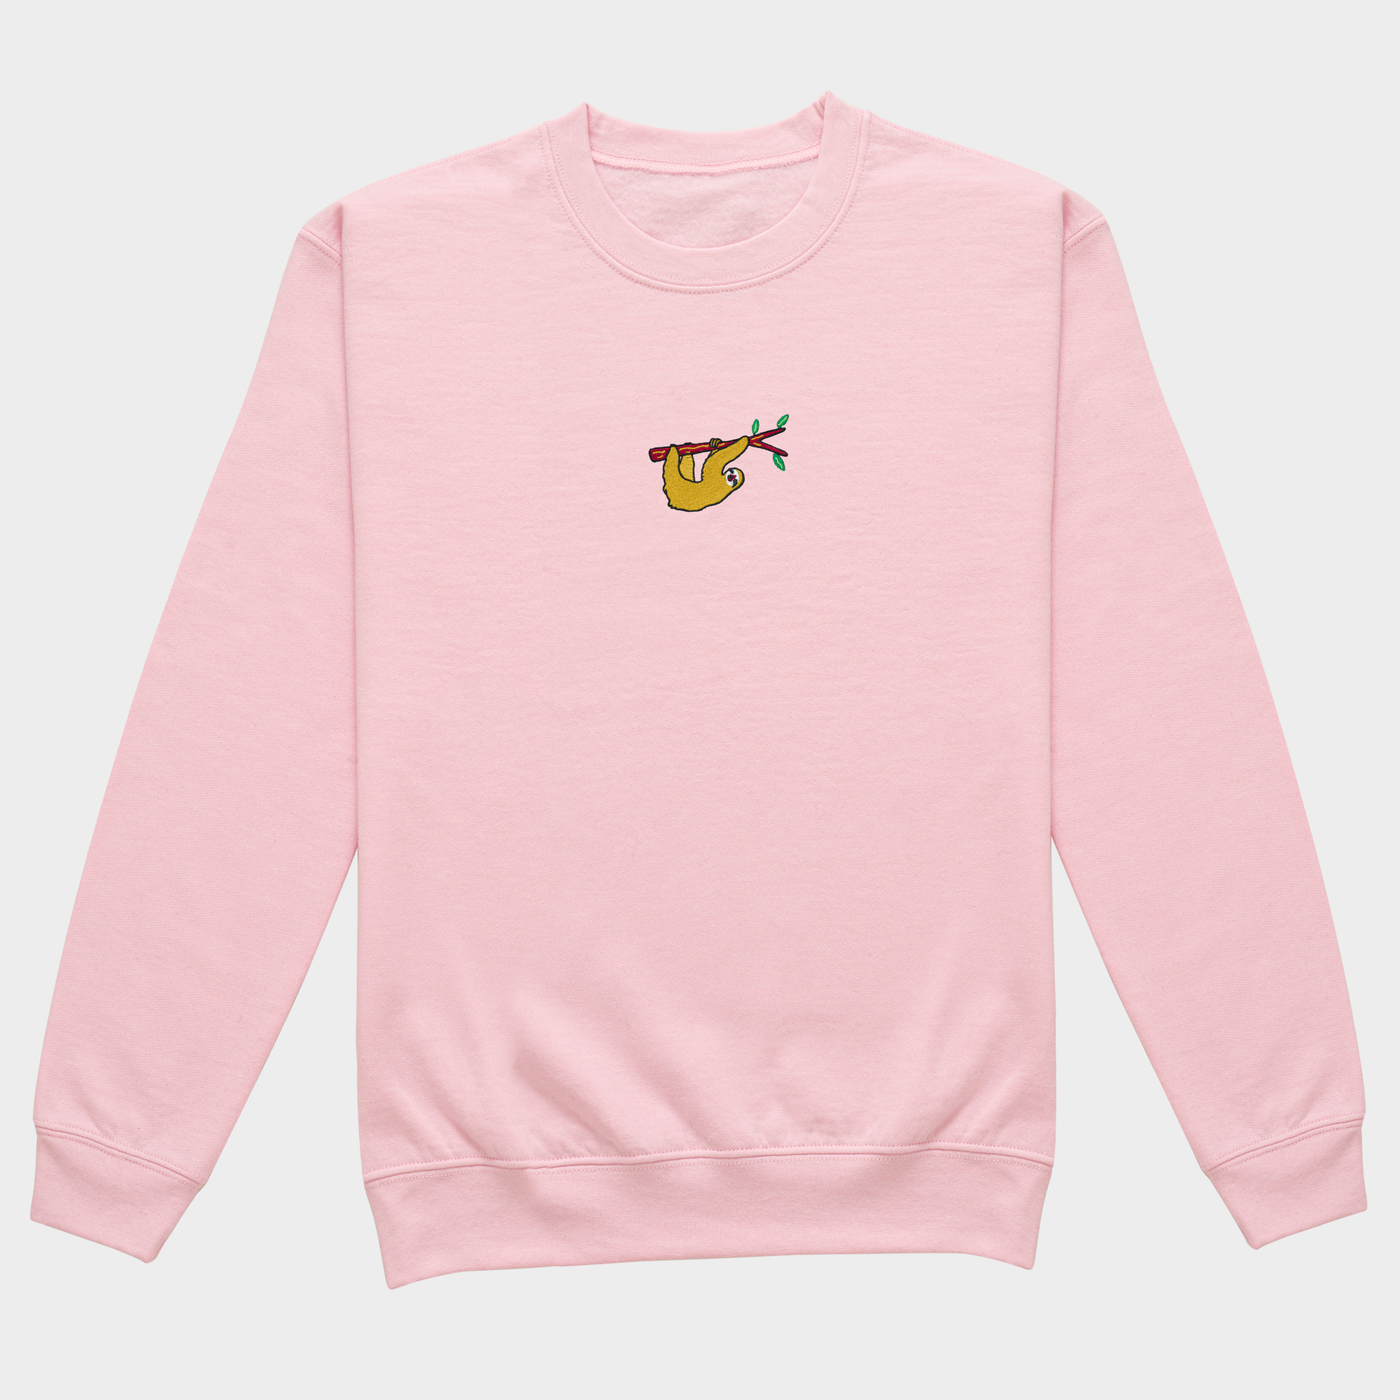 Bobby's Planet Women's Embroidered Sloth Sweatshirt from South American Amazon Animals Collection in Light Pink Color#color_light-pink